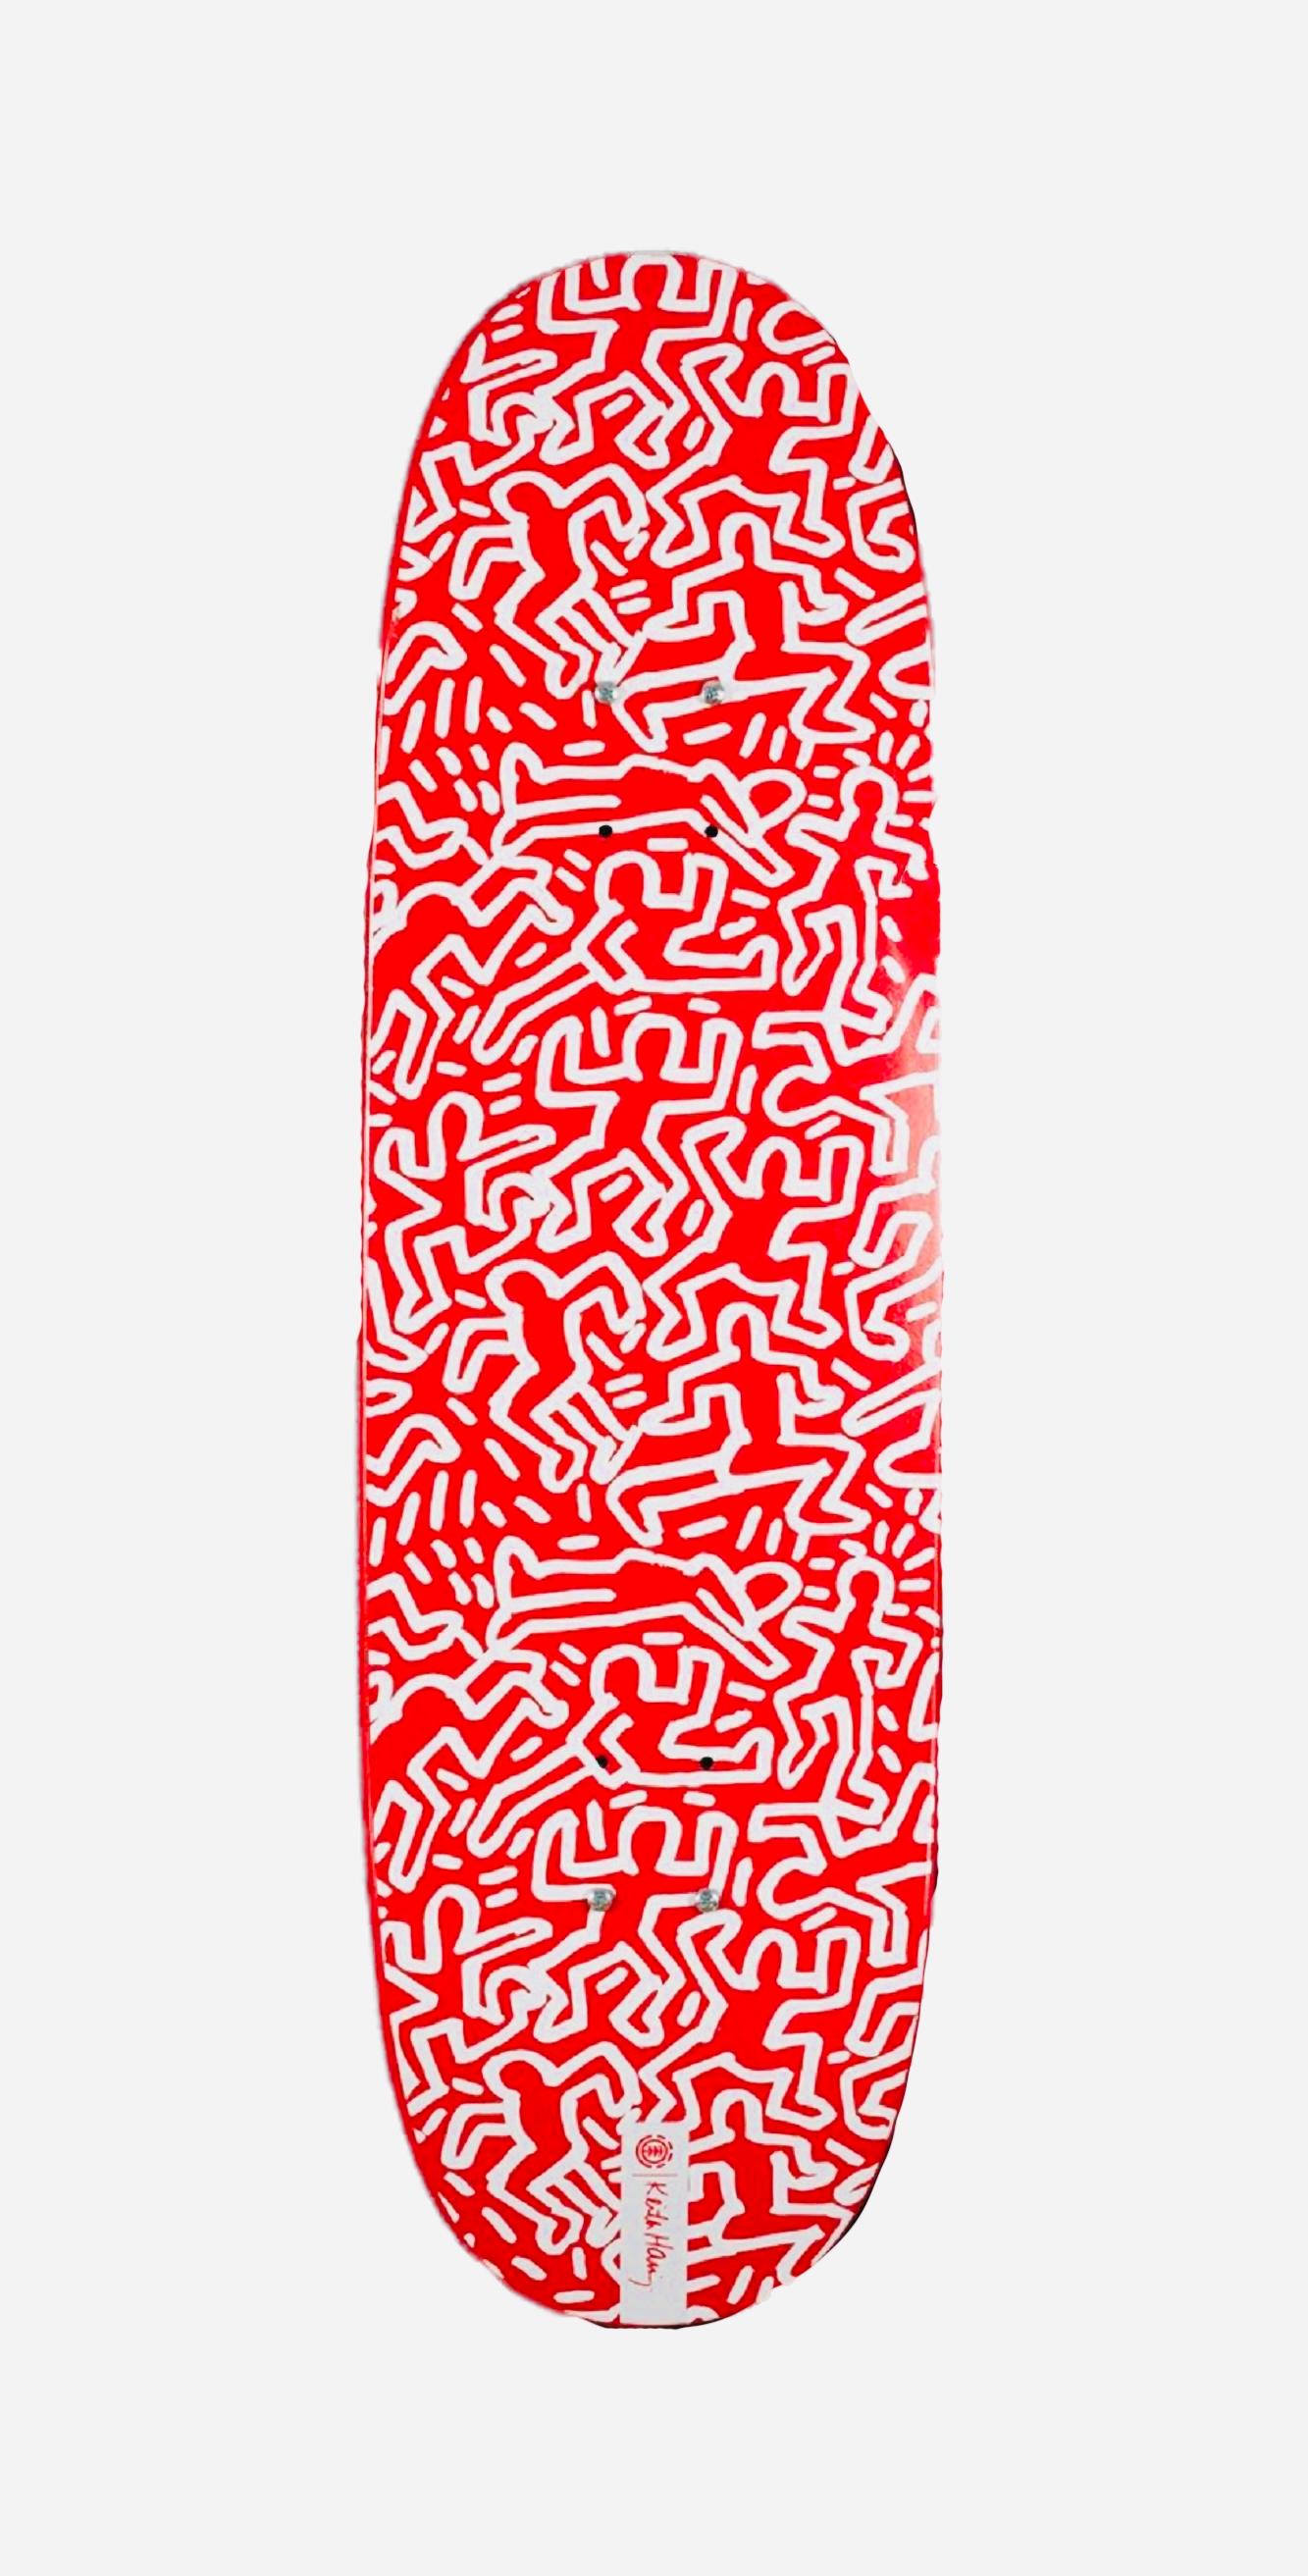 Keith Haring Skateboard Deck (Keith Haring - visage à trois yeux)